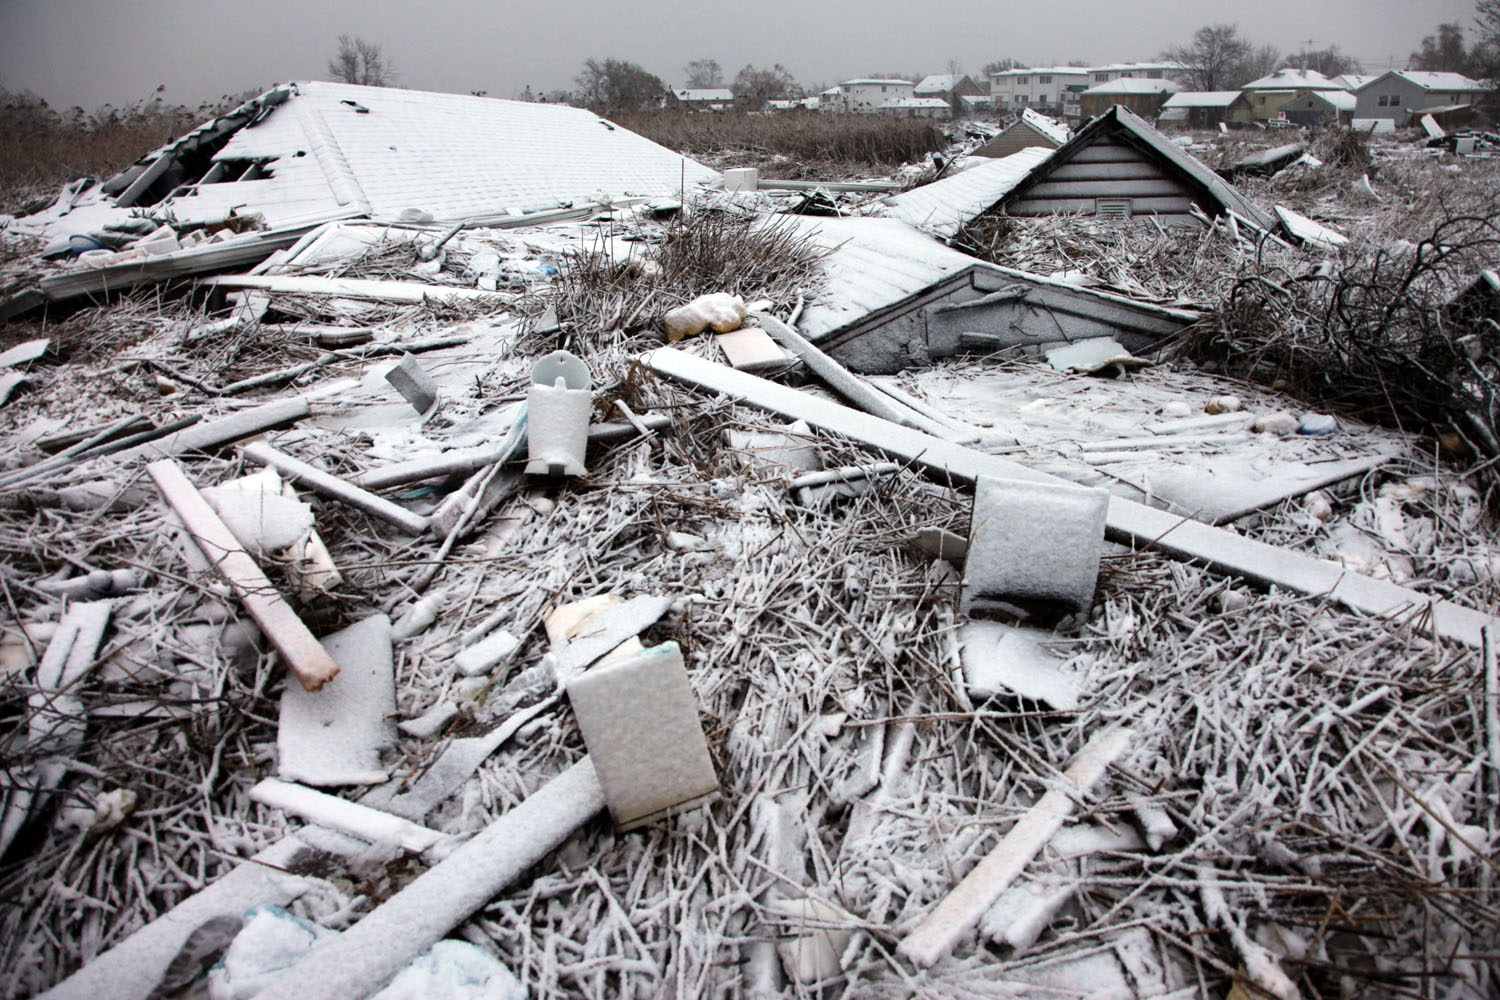 Image: Nor’Easter snow settles on roofs and household debris carried by flood water and wind from Kissam Avenue to the marsh along Mill Road during Superstorm Sandy.